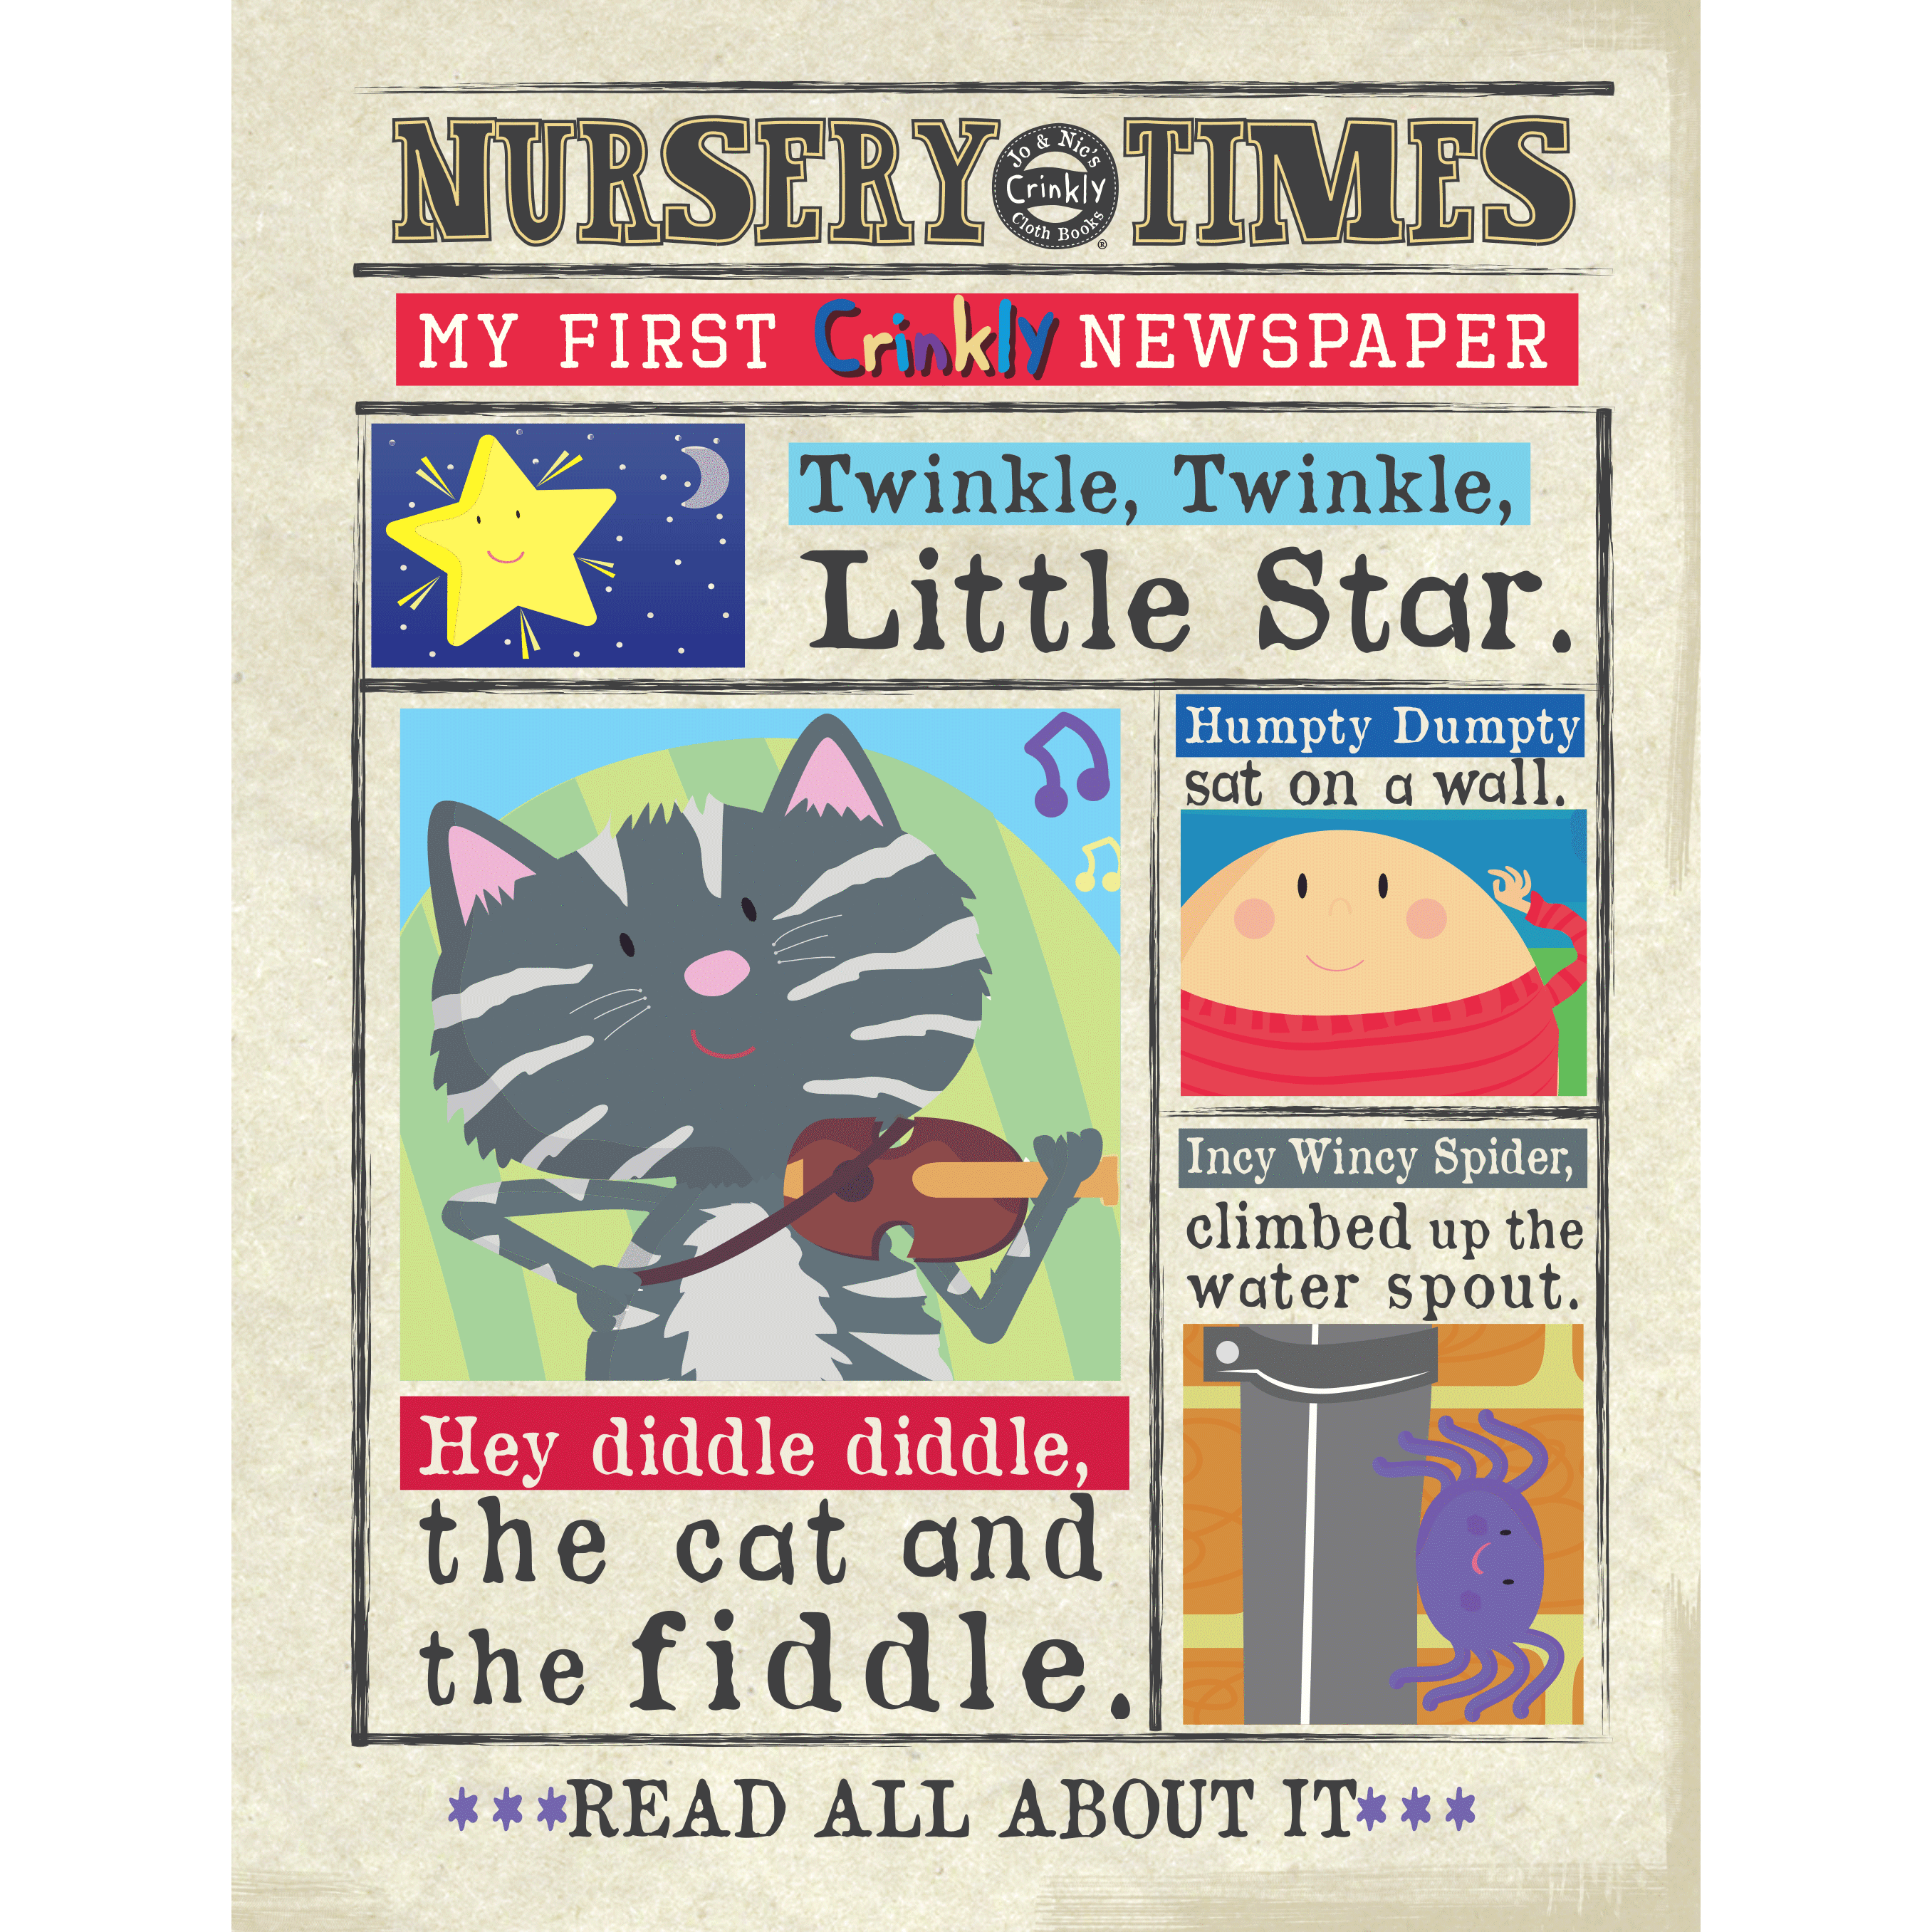 Nursery Times Crinkly Newspaper - Hey diddle diddle